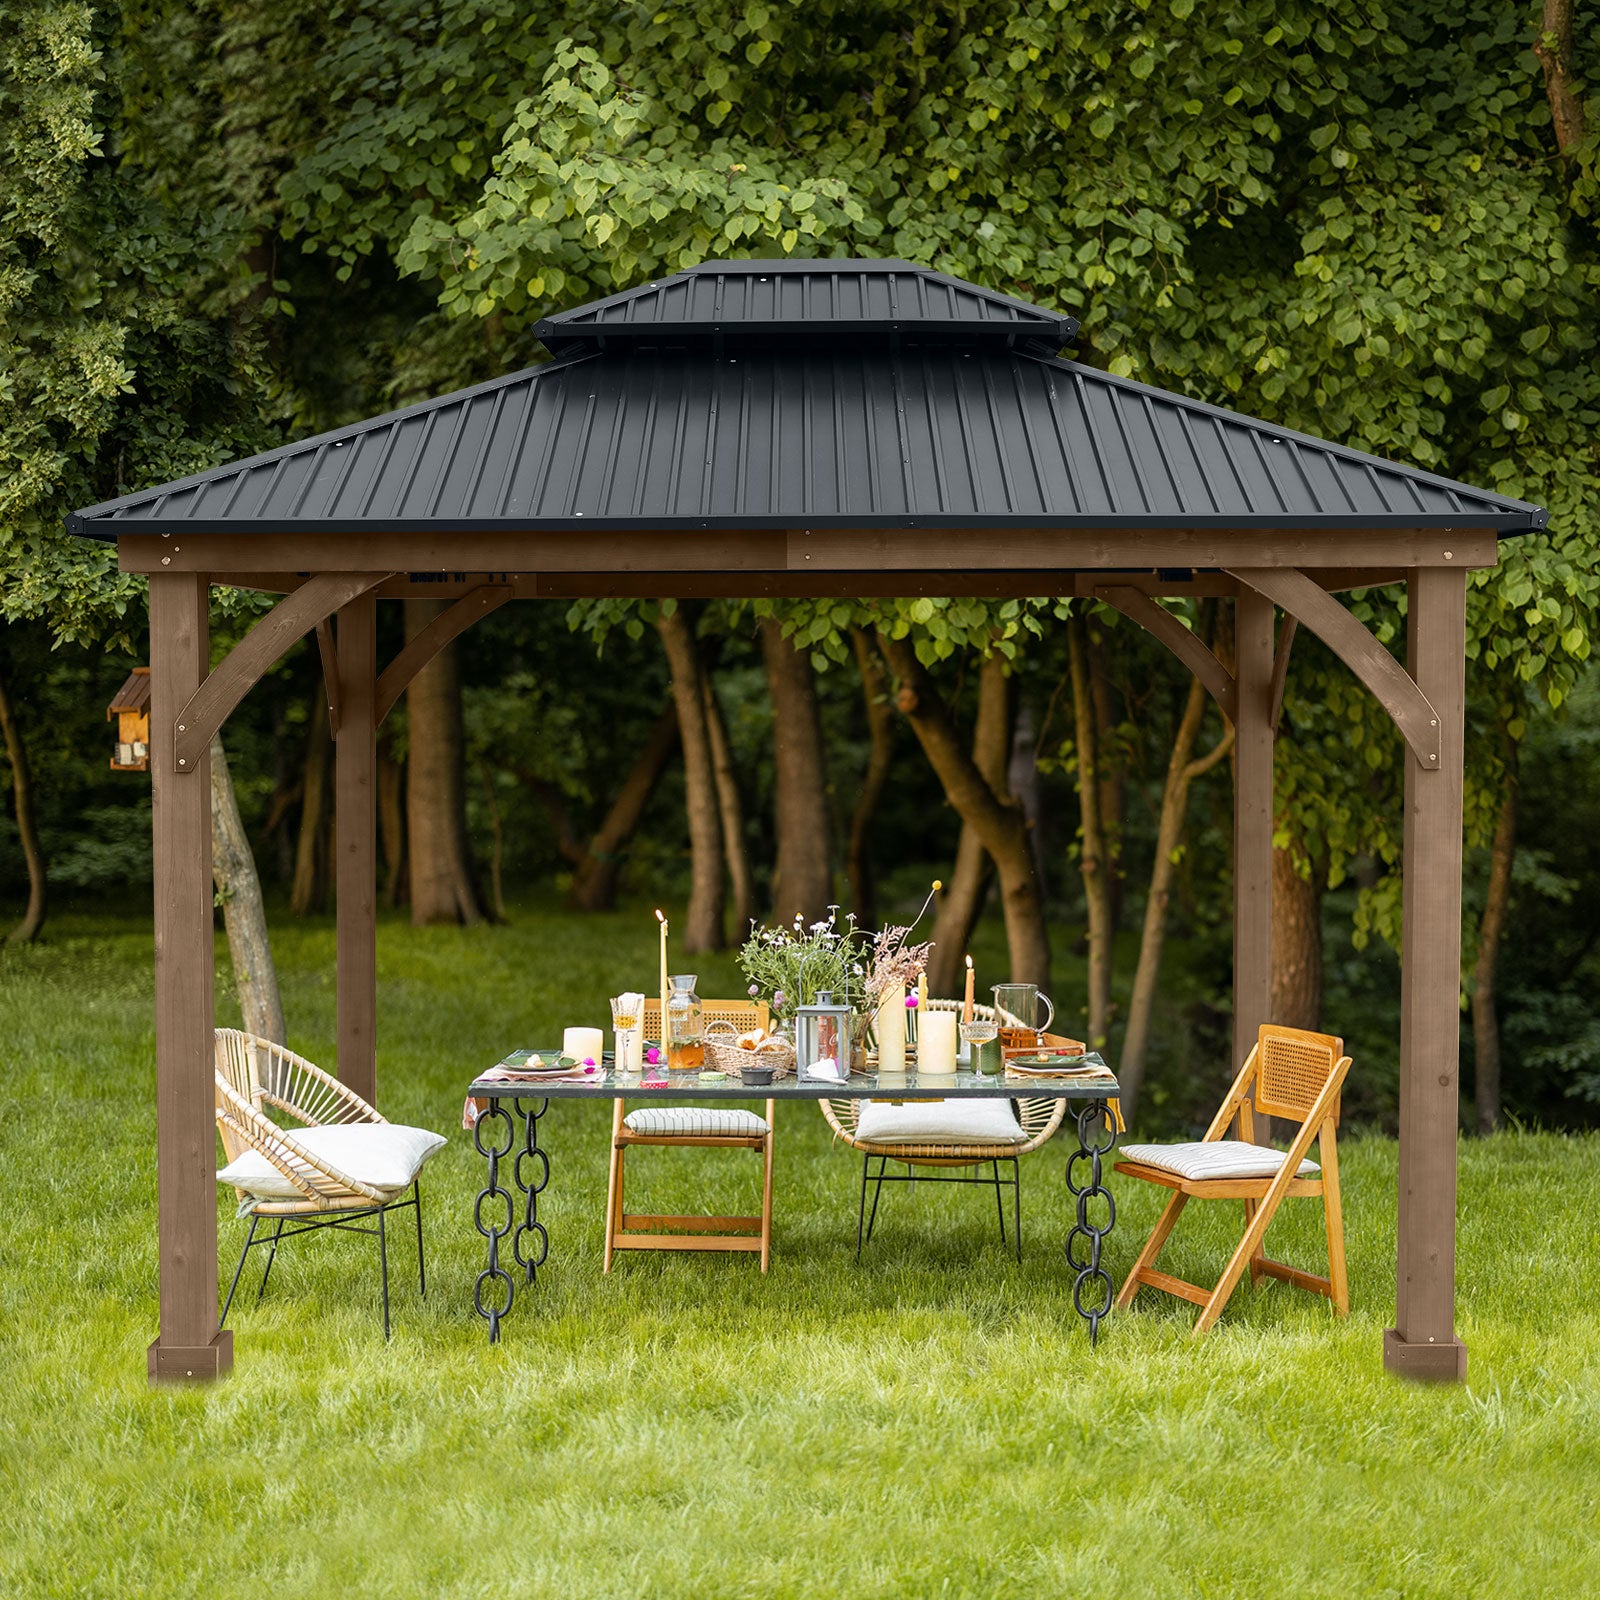 12 x 10 ft. Outdoor Solid Wooden Frame Gazebo with 2-Tier Hardtop Roof  Aoodor    